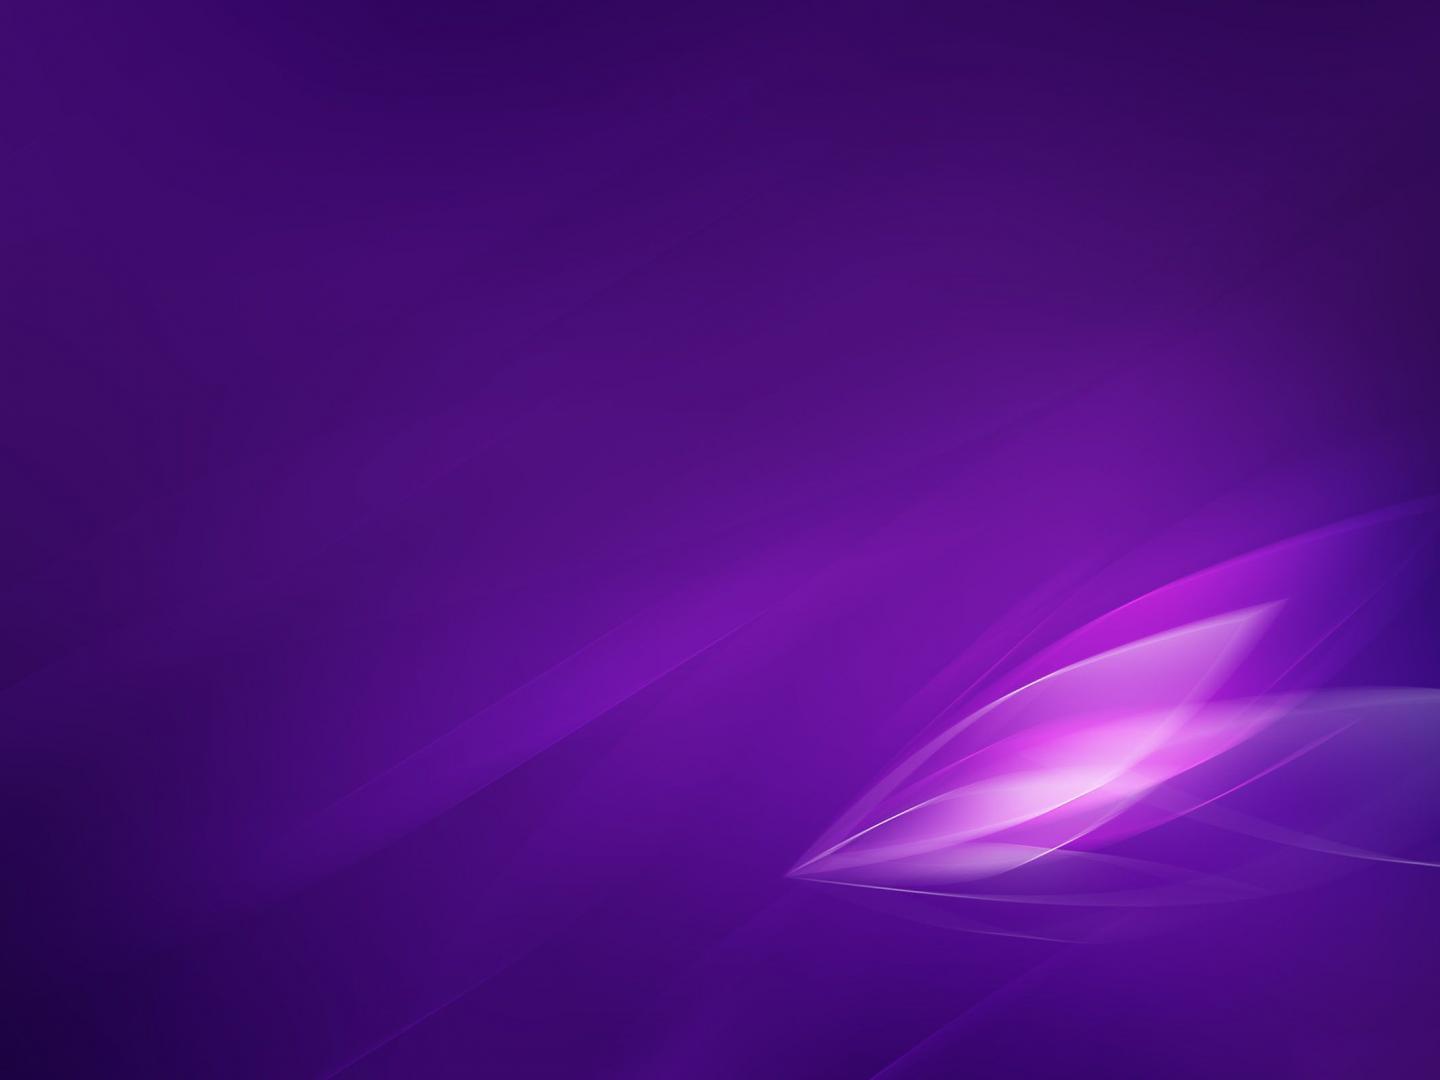 1087551 Purple Background Abstract Stock Photos and Images  123RF